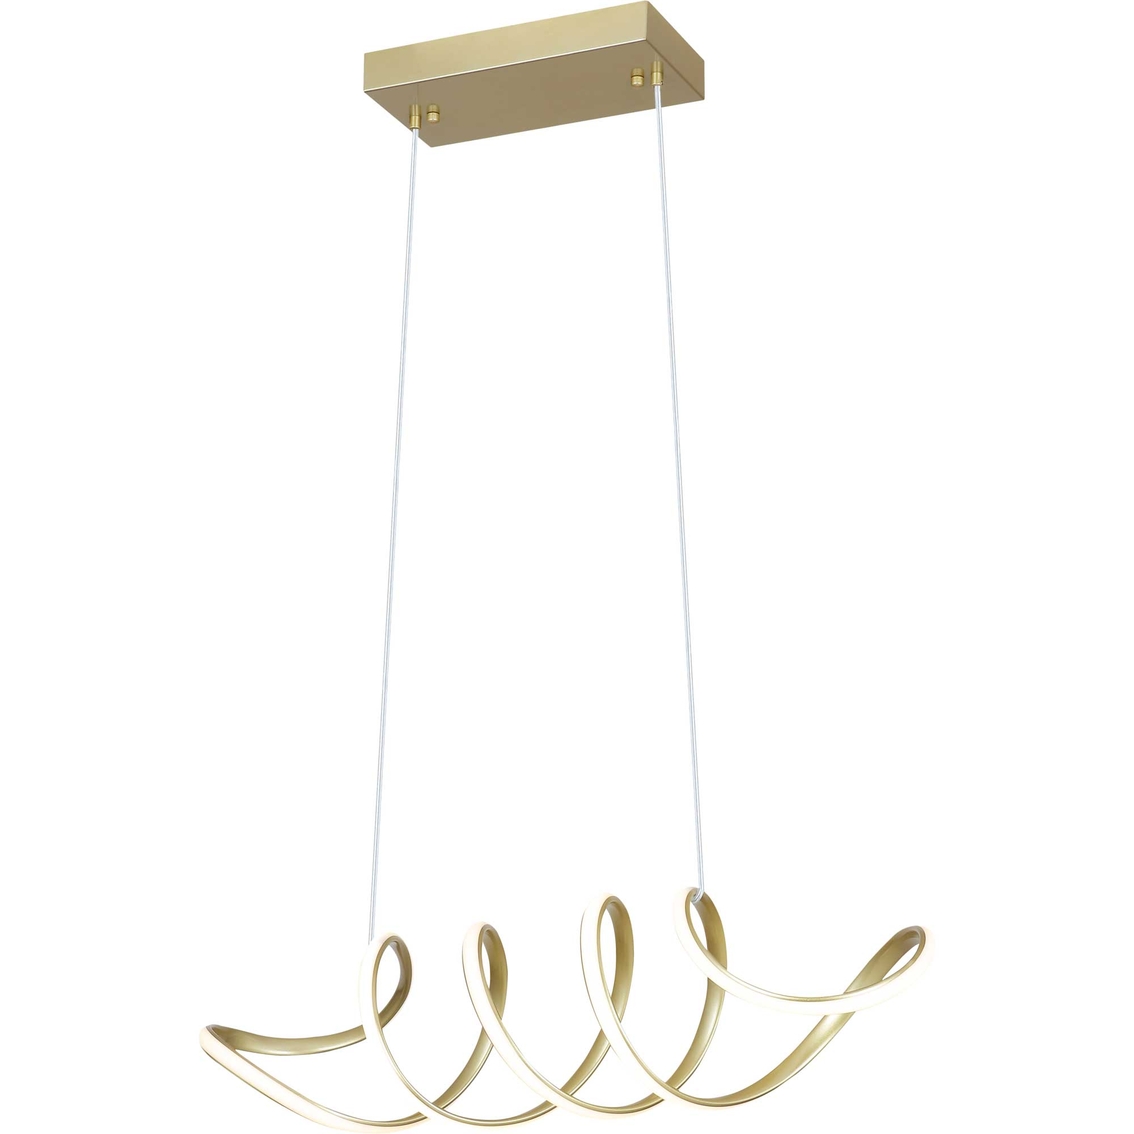 Artiva USA Infinito Integrated LED Anodized Gold Modern Unique Chandelier - Image 2 of 5